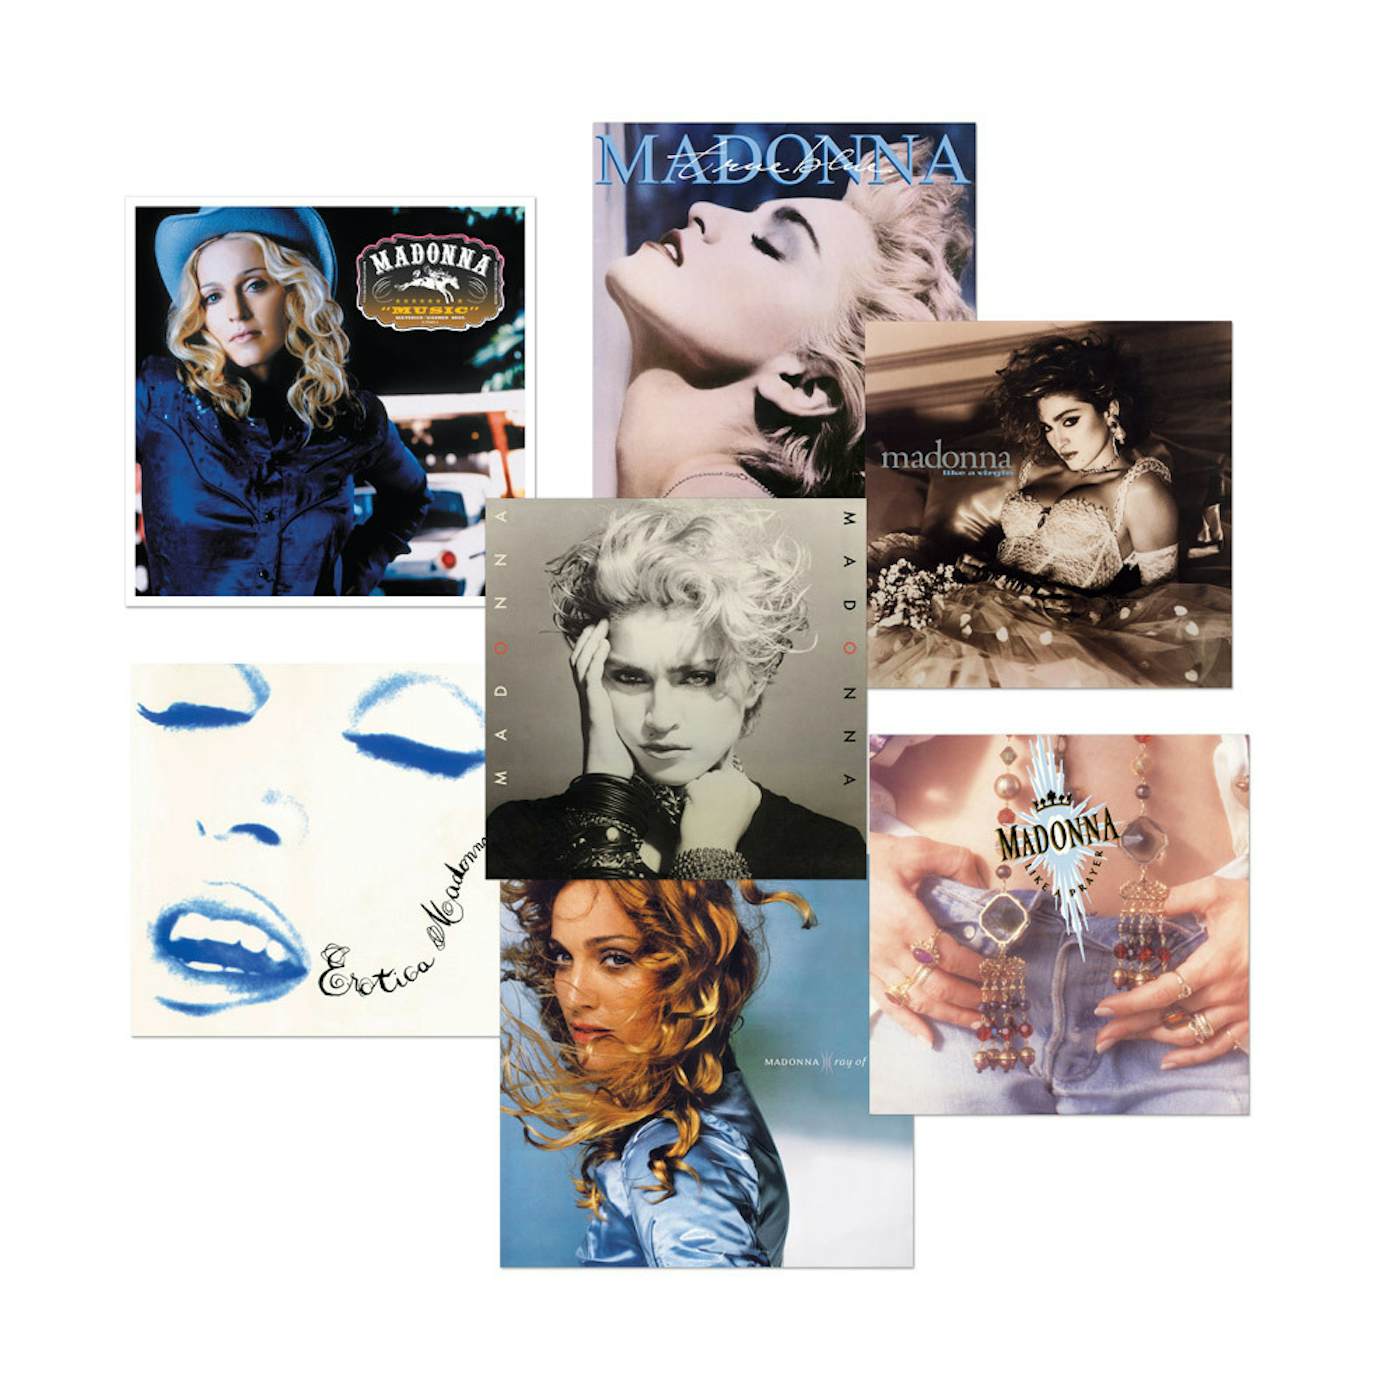 Madonna Lithograph Collector's Set. Limited Collector's Edition 1/1000